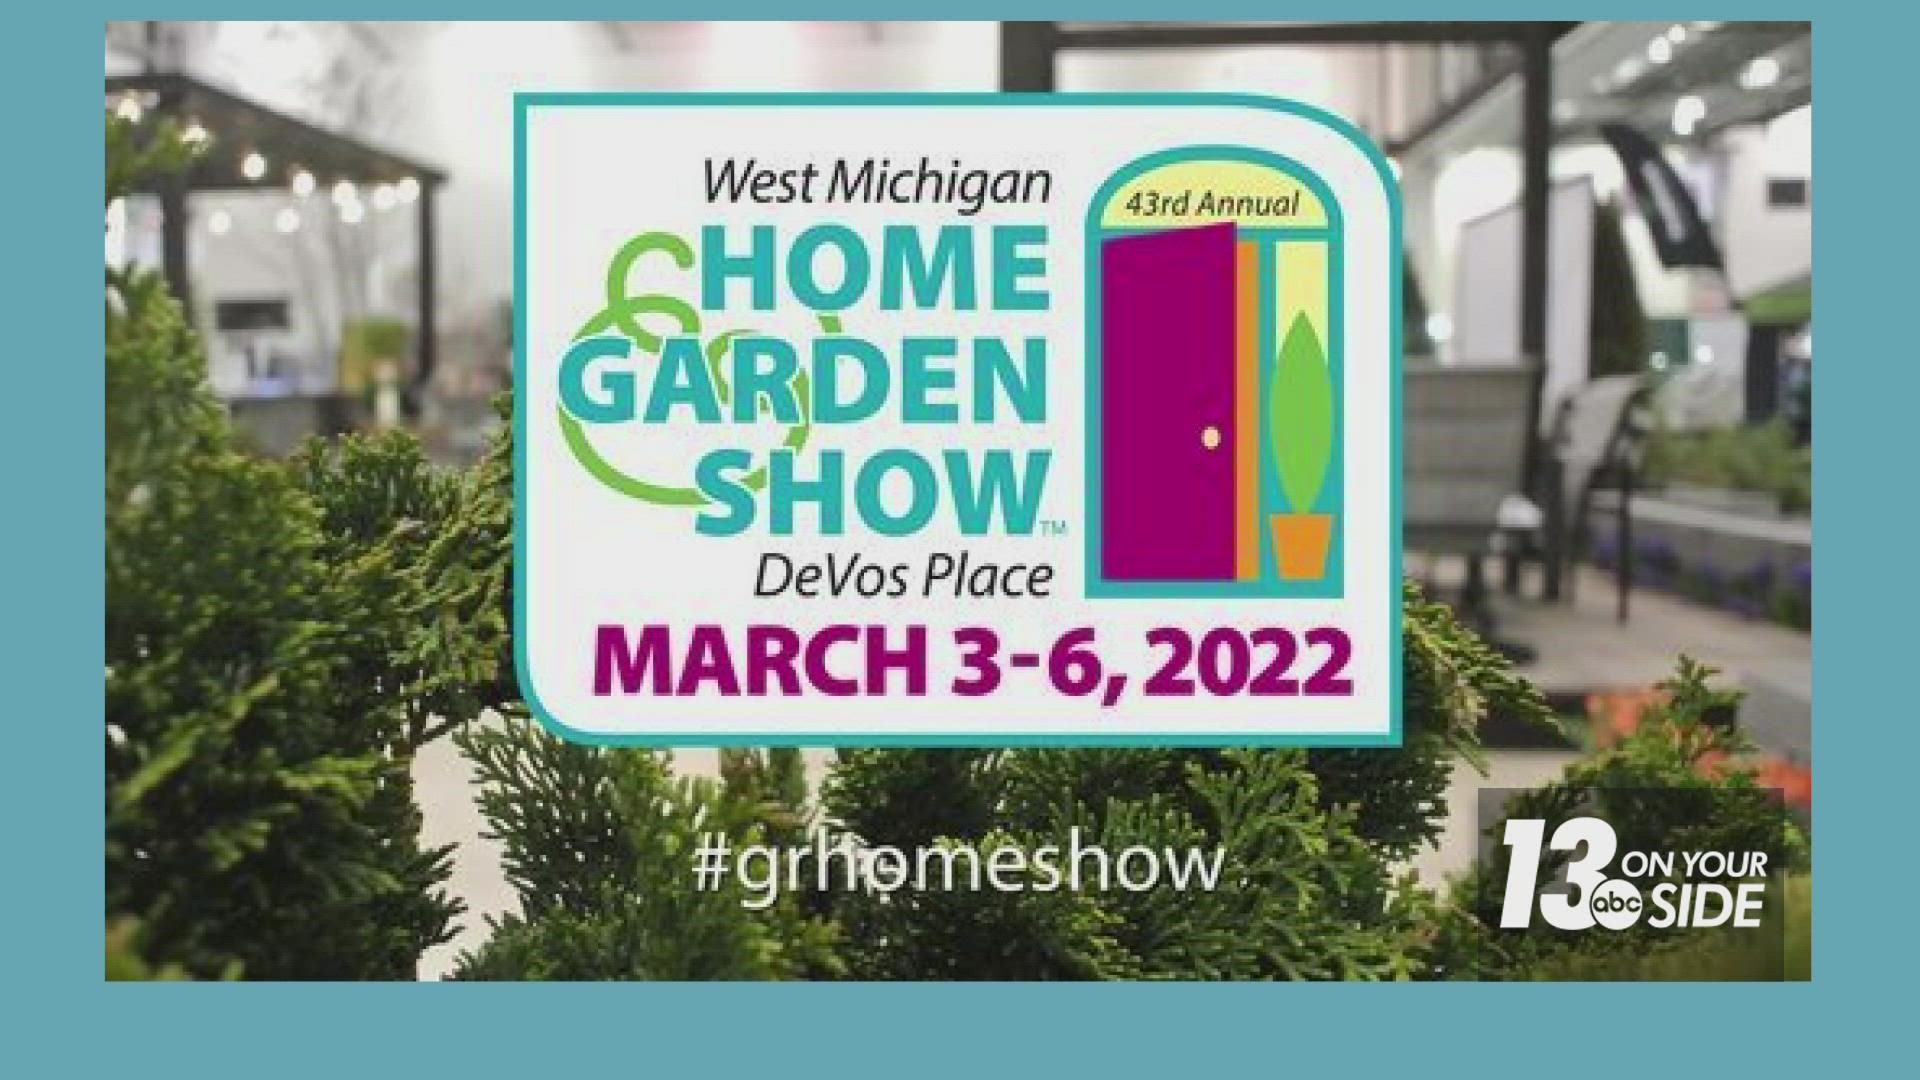 Leslie Hart-Davidson will be giving a series of seminars this week at the West Michigan Home and Garden Show.